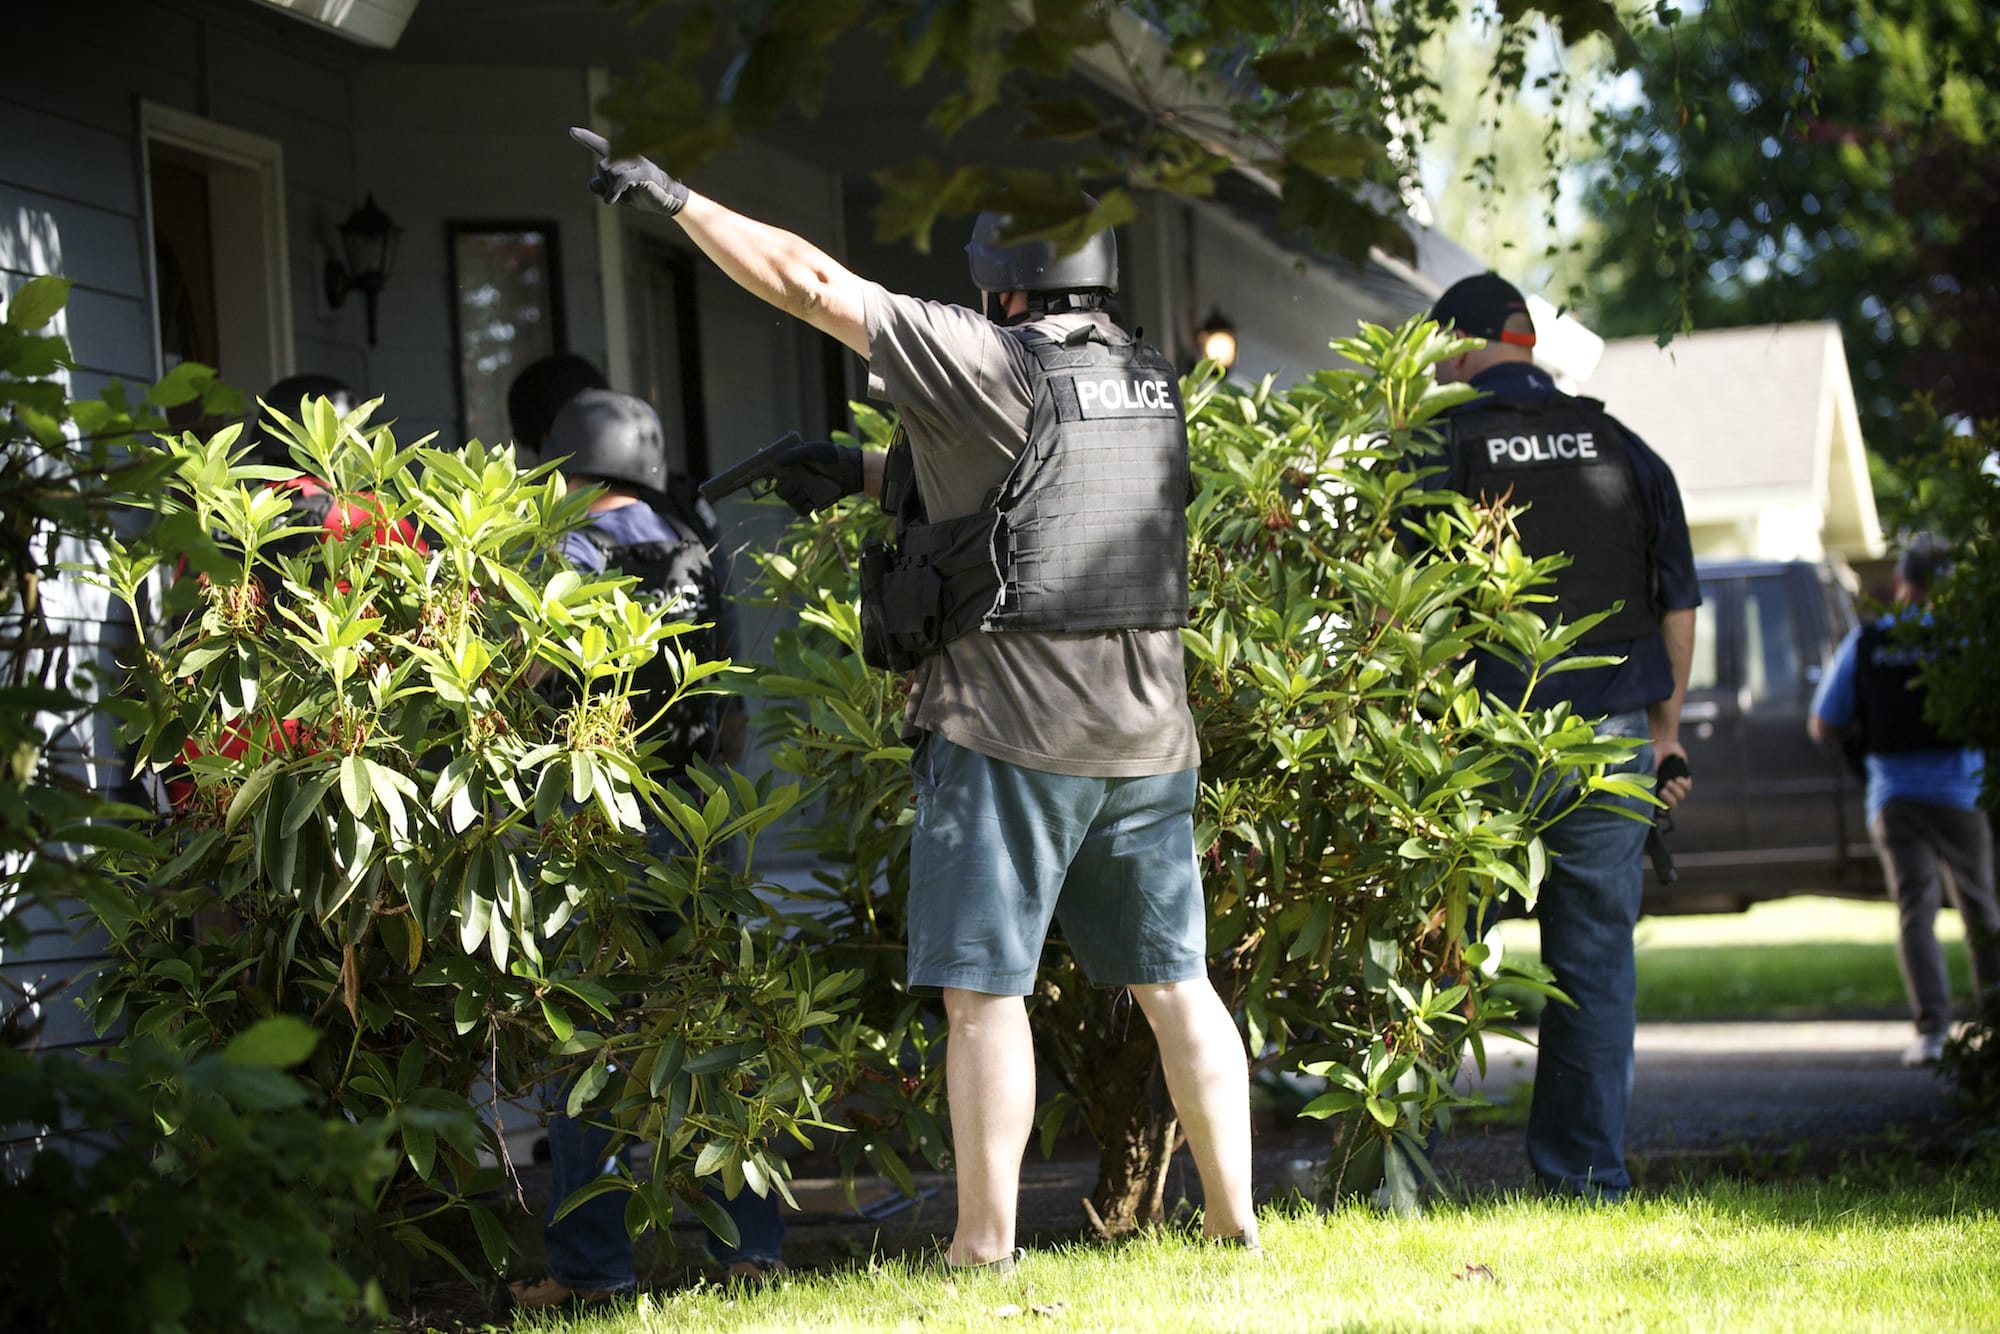 The Clark-Vancouver Regional Drug Task Force executes a search warrant at a suspected drug house Wednesday in Felida.